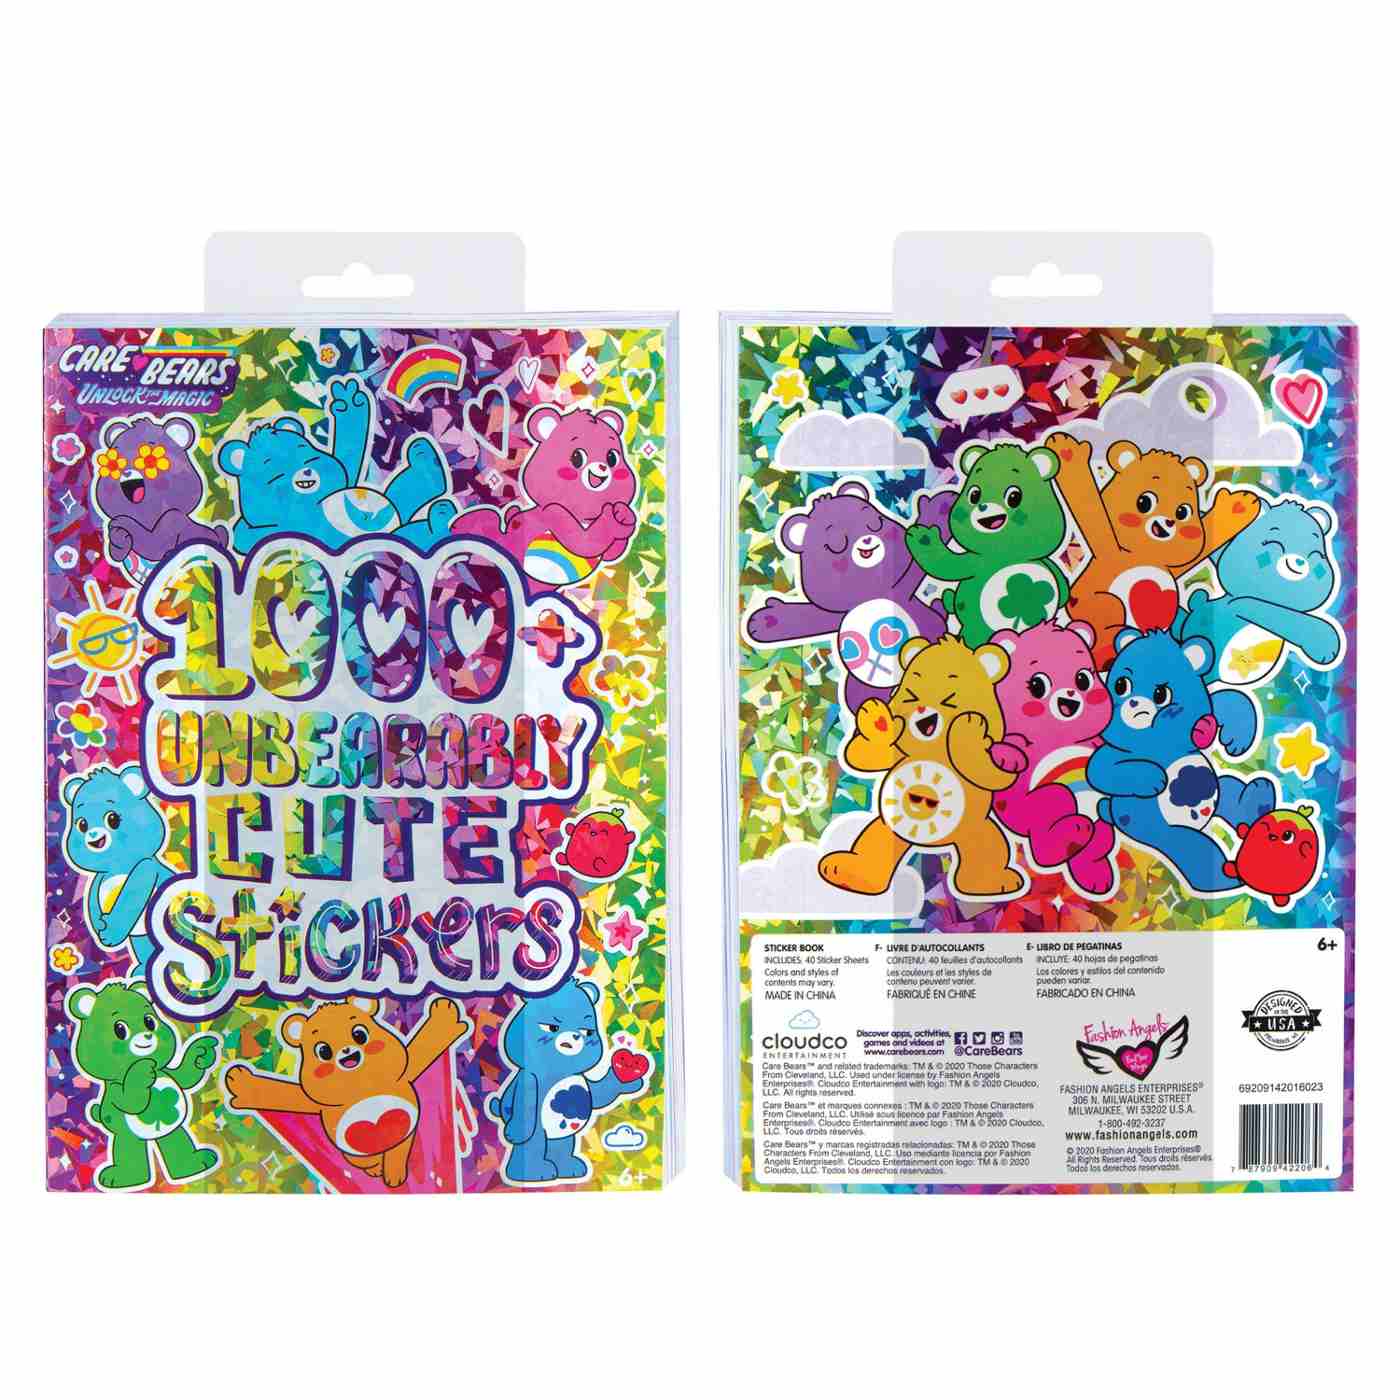 Fashion Angels Care Bears Sticker Book; image 4 of 8